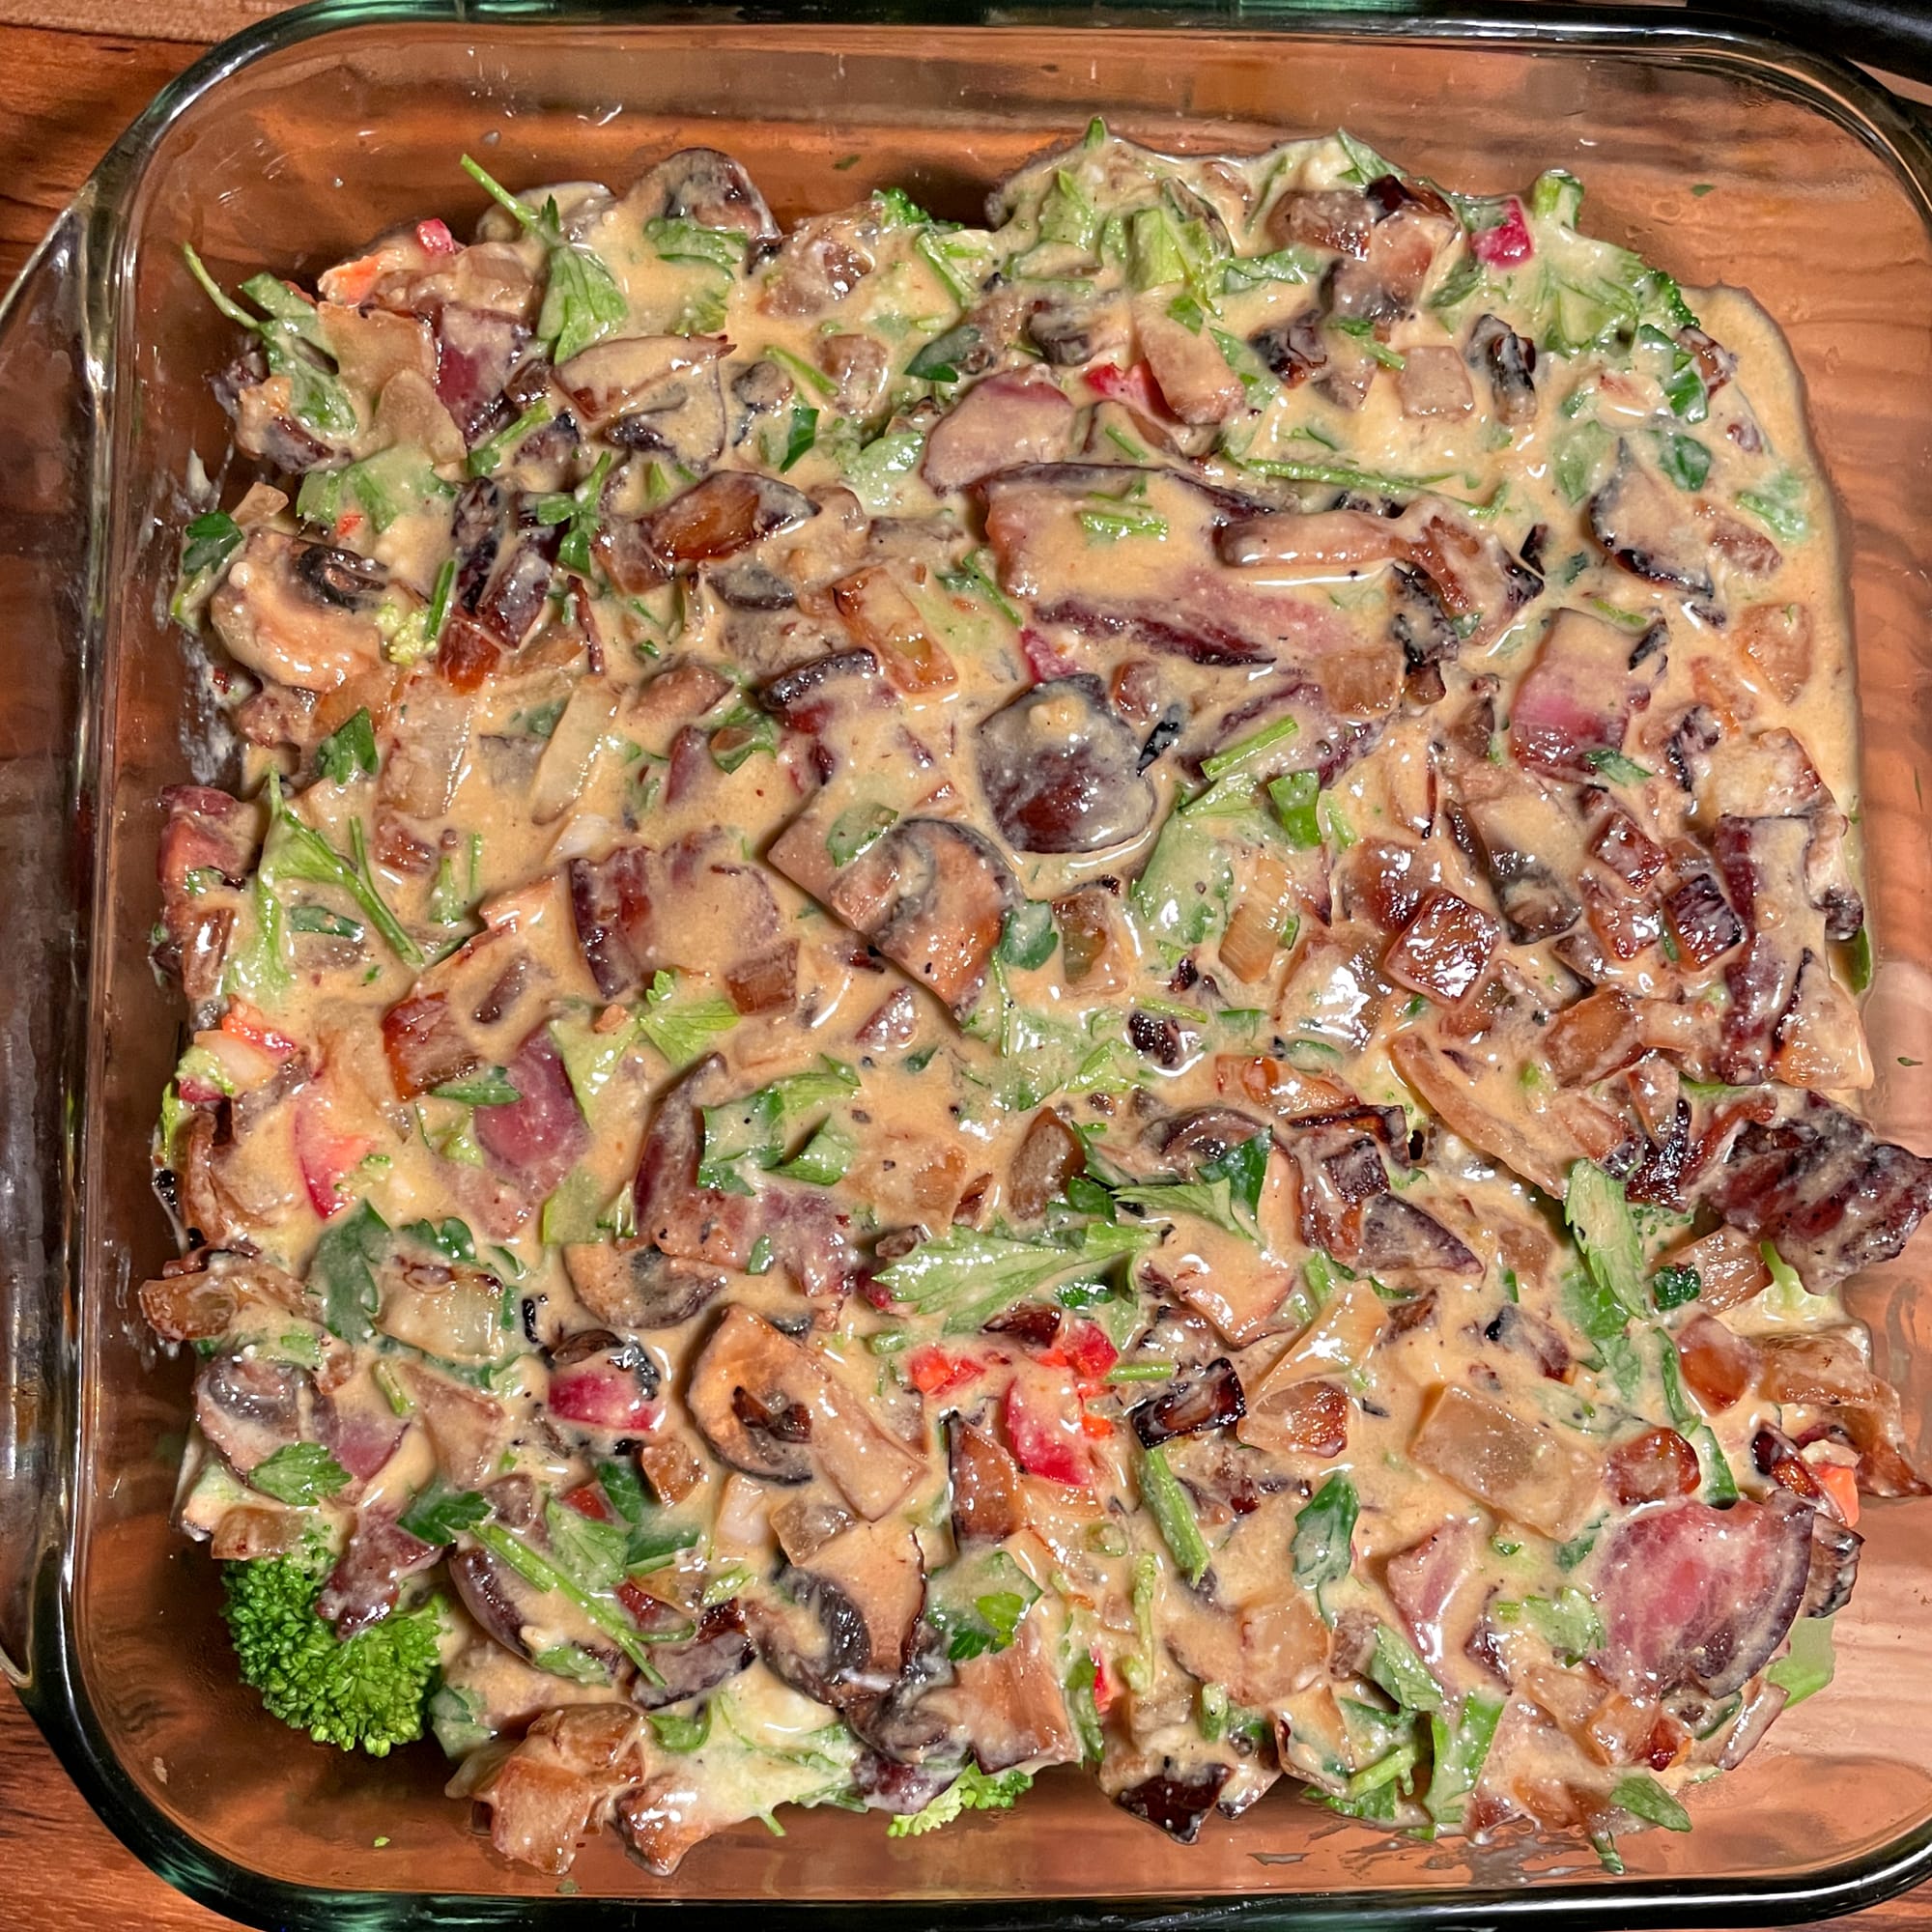 Broccoli and Mushroom Bake With Speck (smoked meat)